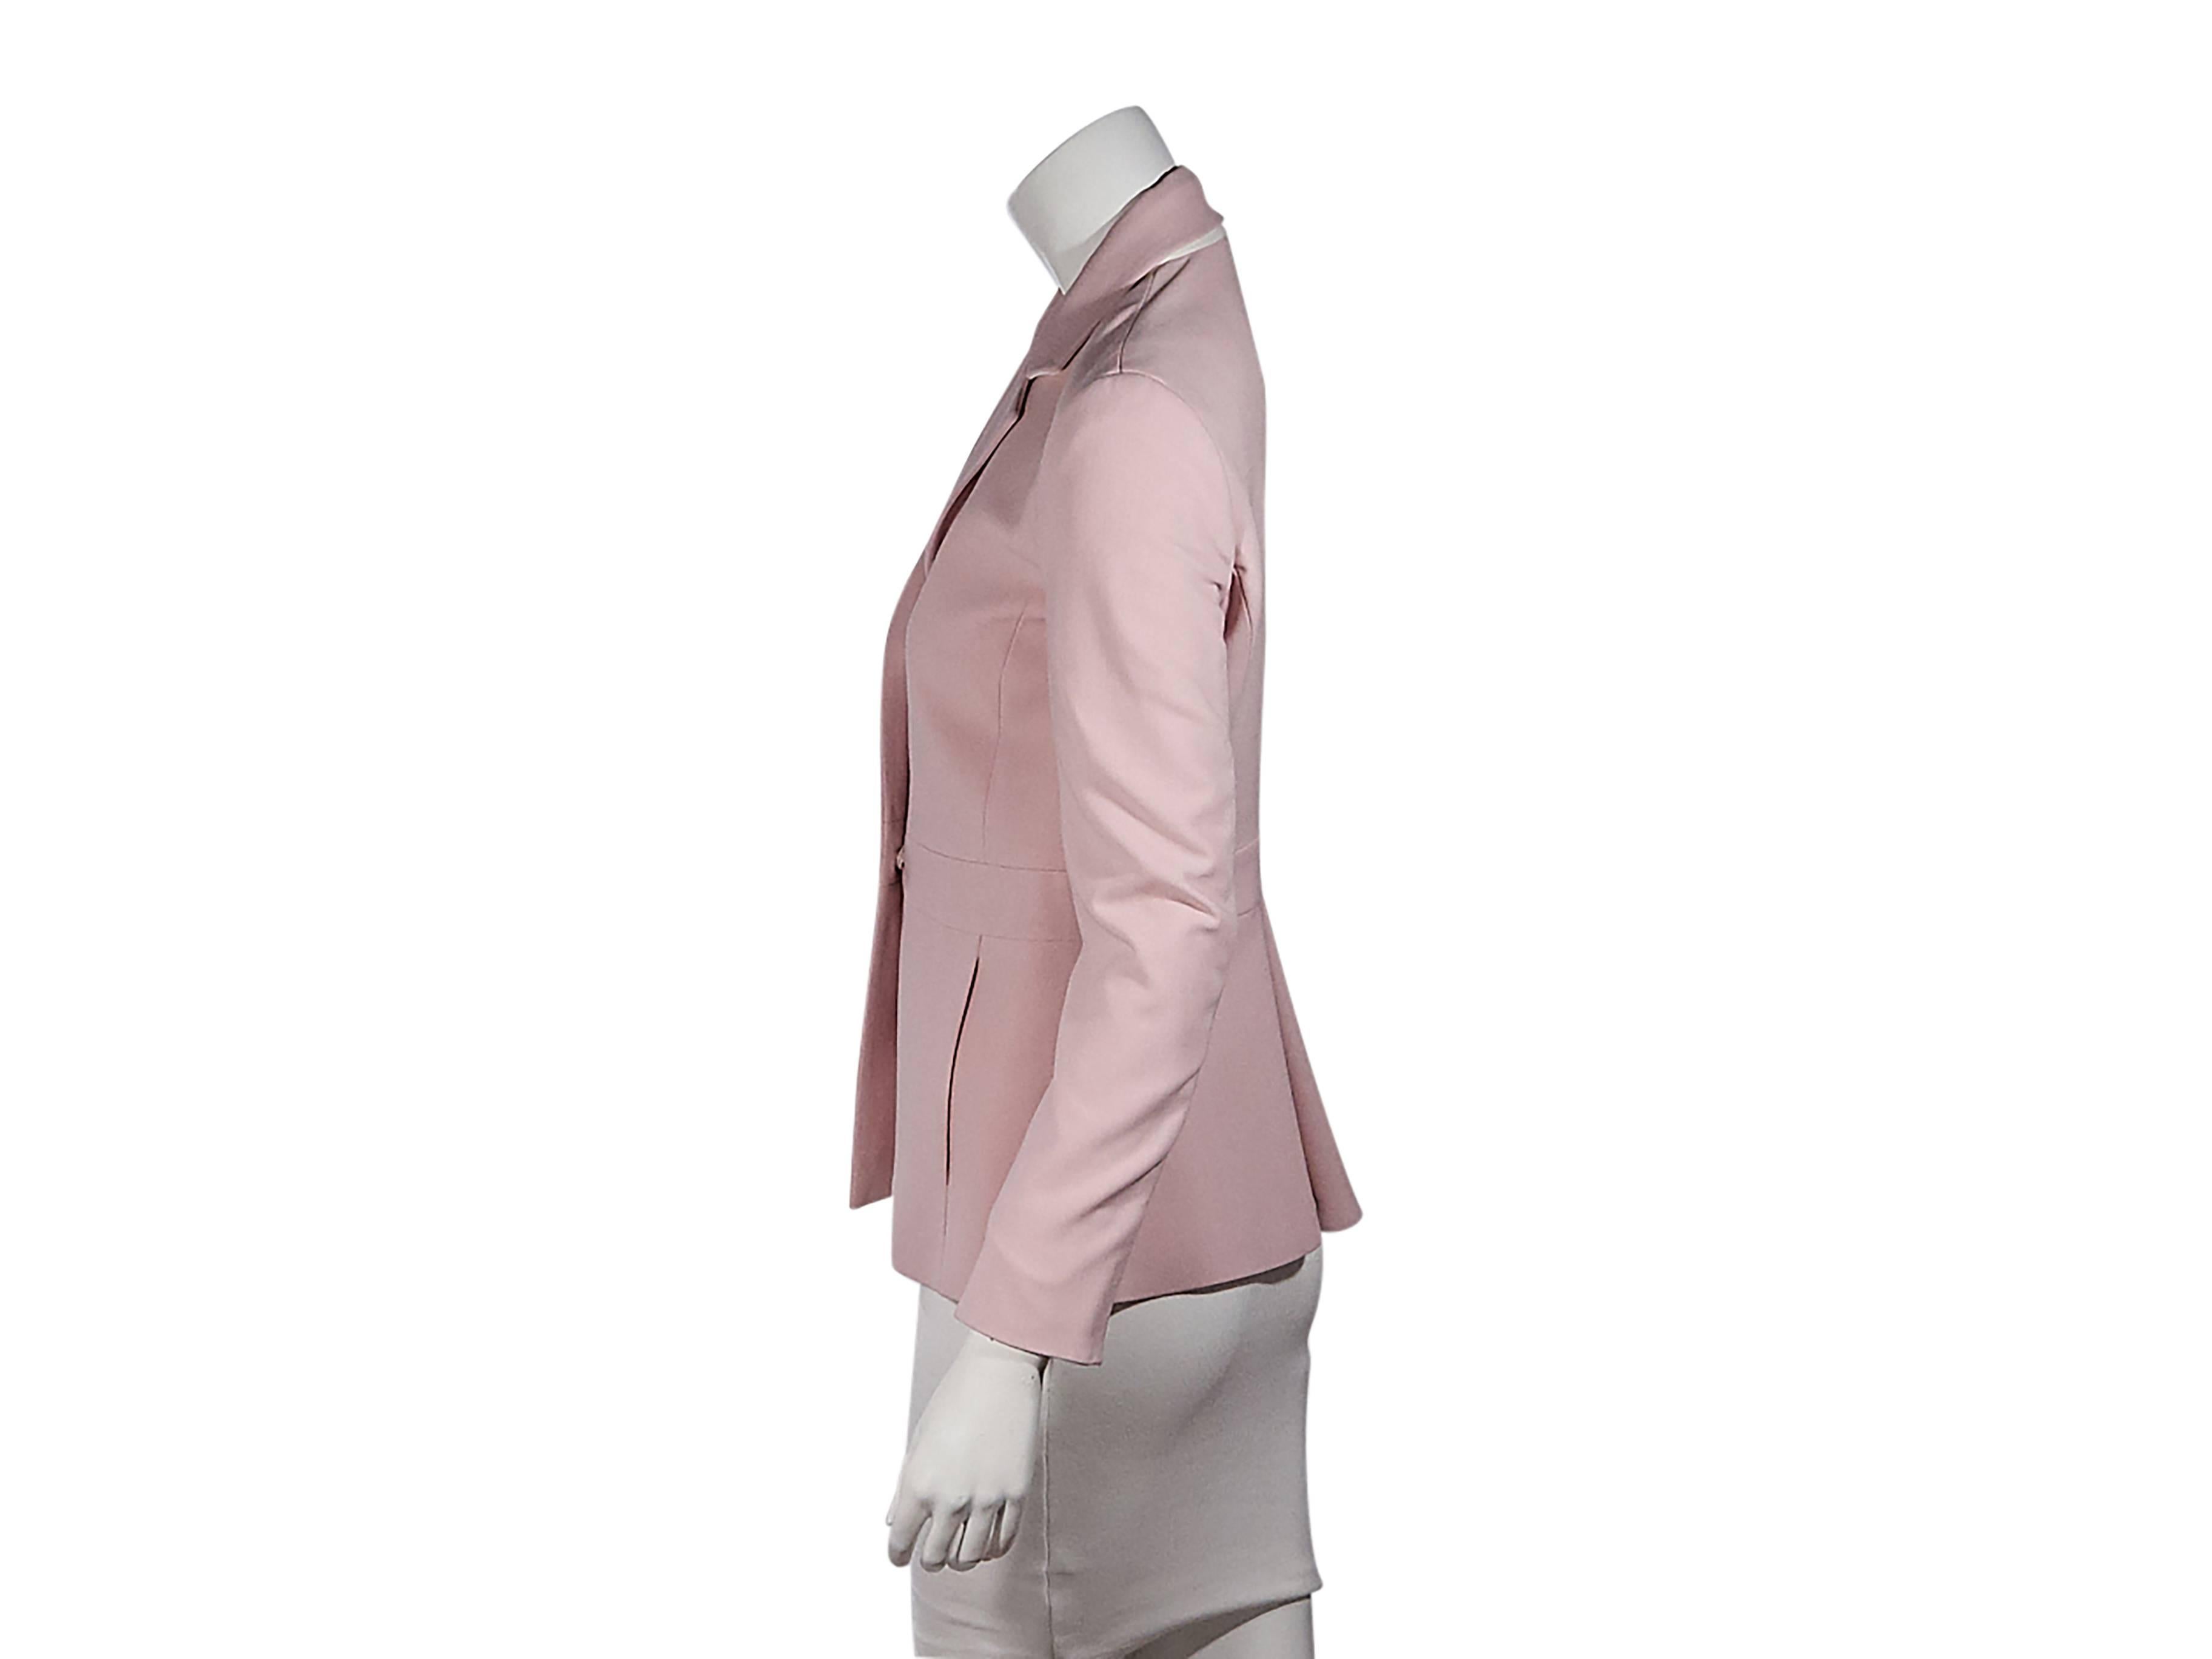 Product details:  Pink blazer by Fendi.  Notched lapel.  Bracelet-length sleeves.  Concealed front closure.  On-seam slide pockets.  Back box pleat at hem. Size 4
Condition: Pre-owned. Very good.

Est. Retail $ 1,300.00
